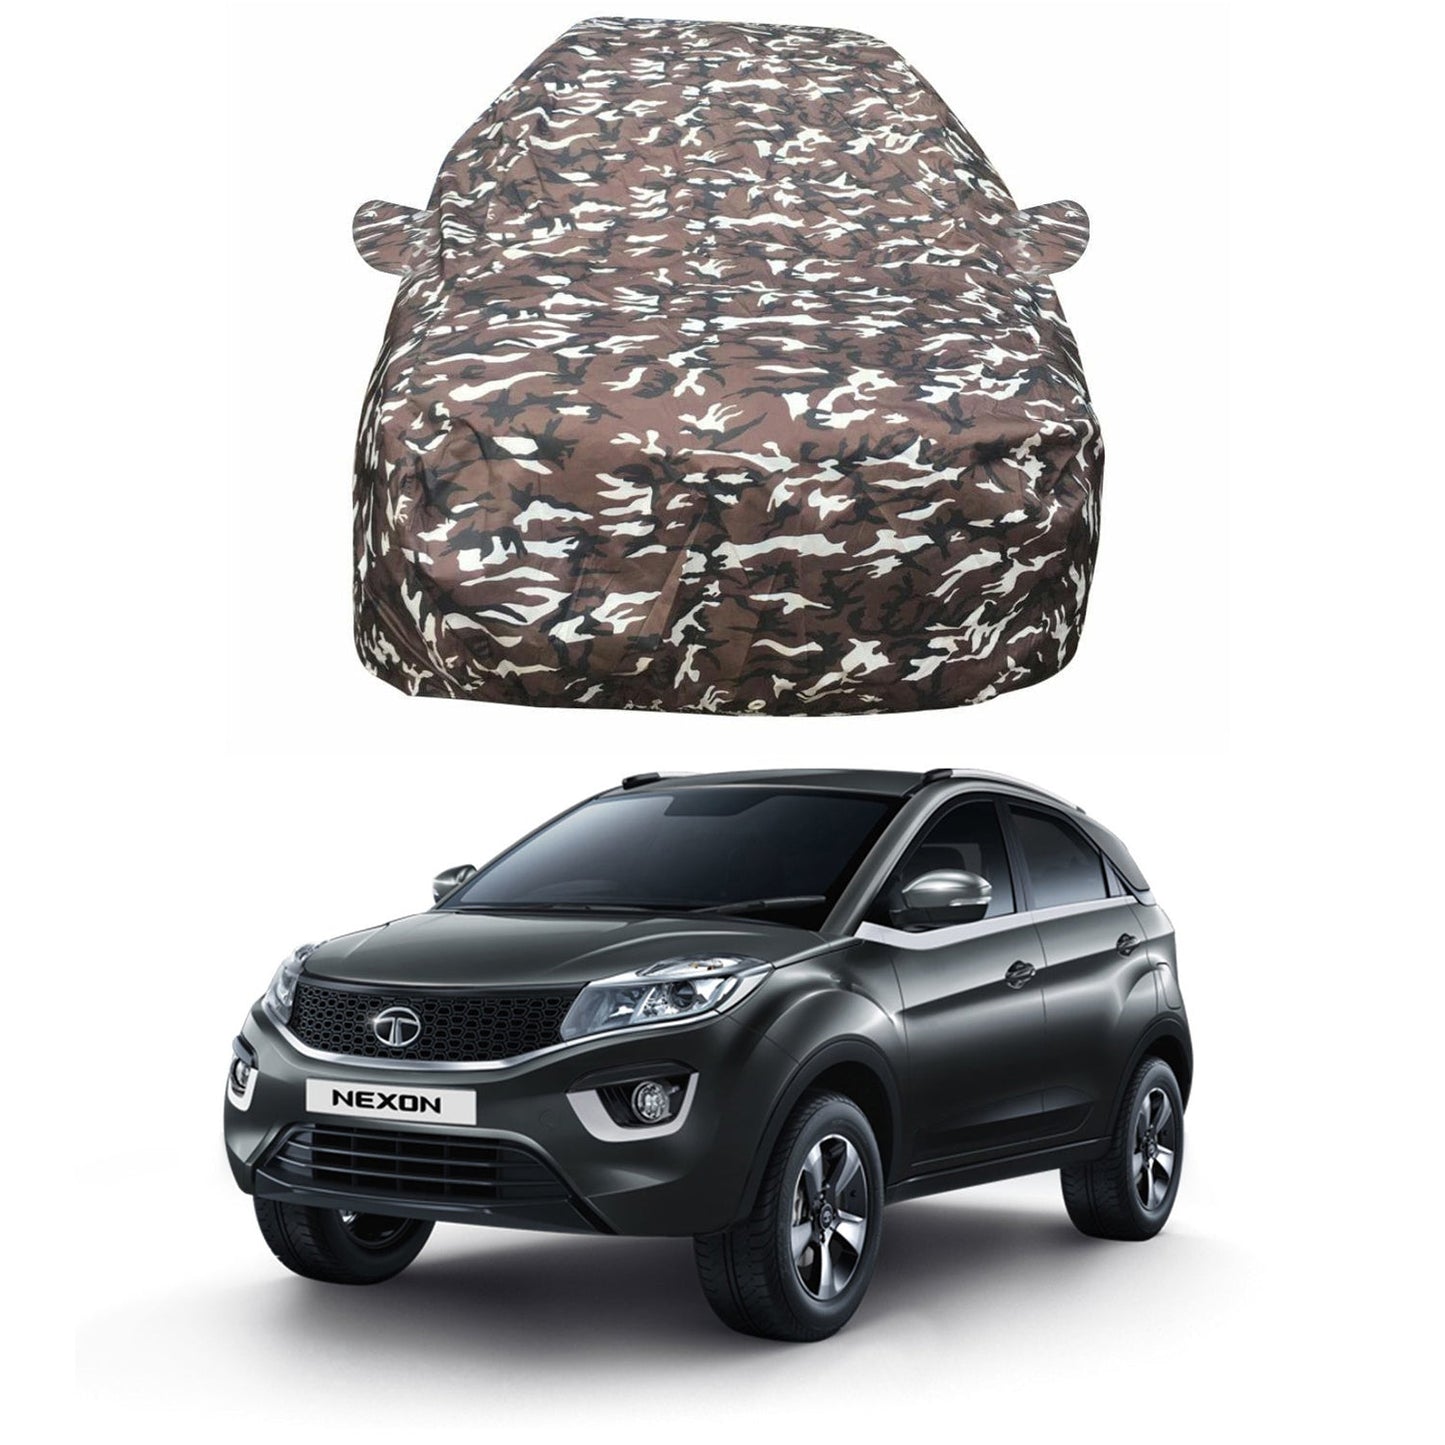 Oshotto Ranger Design Made of 100% Waterproof Fabric Multicolor Car Body Cover with Mirror Pocket For Tata Nexon